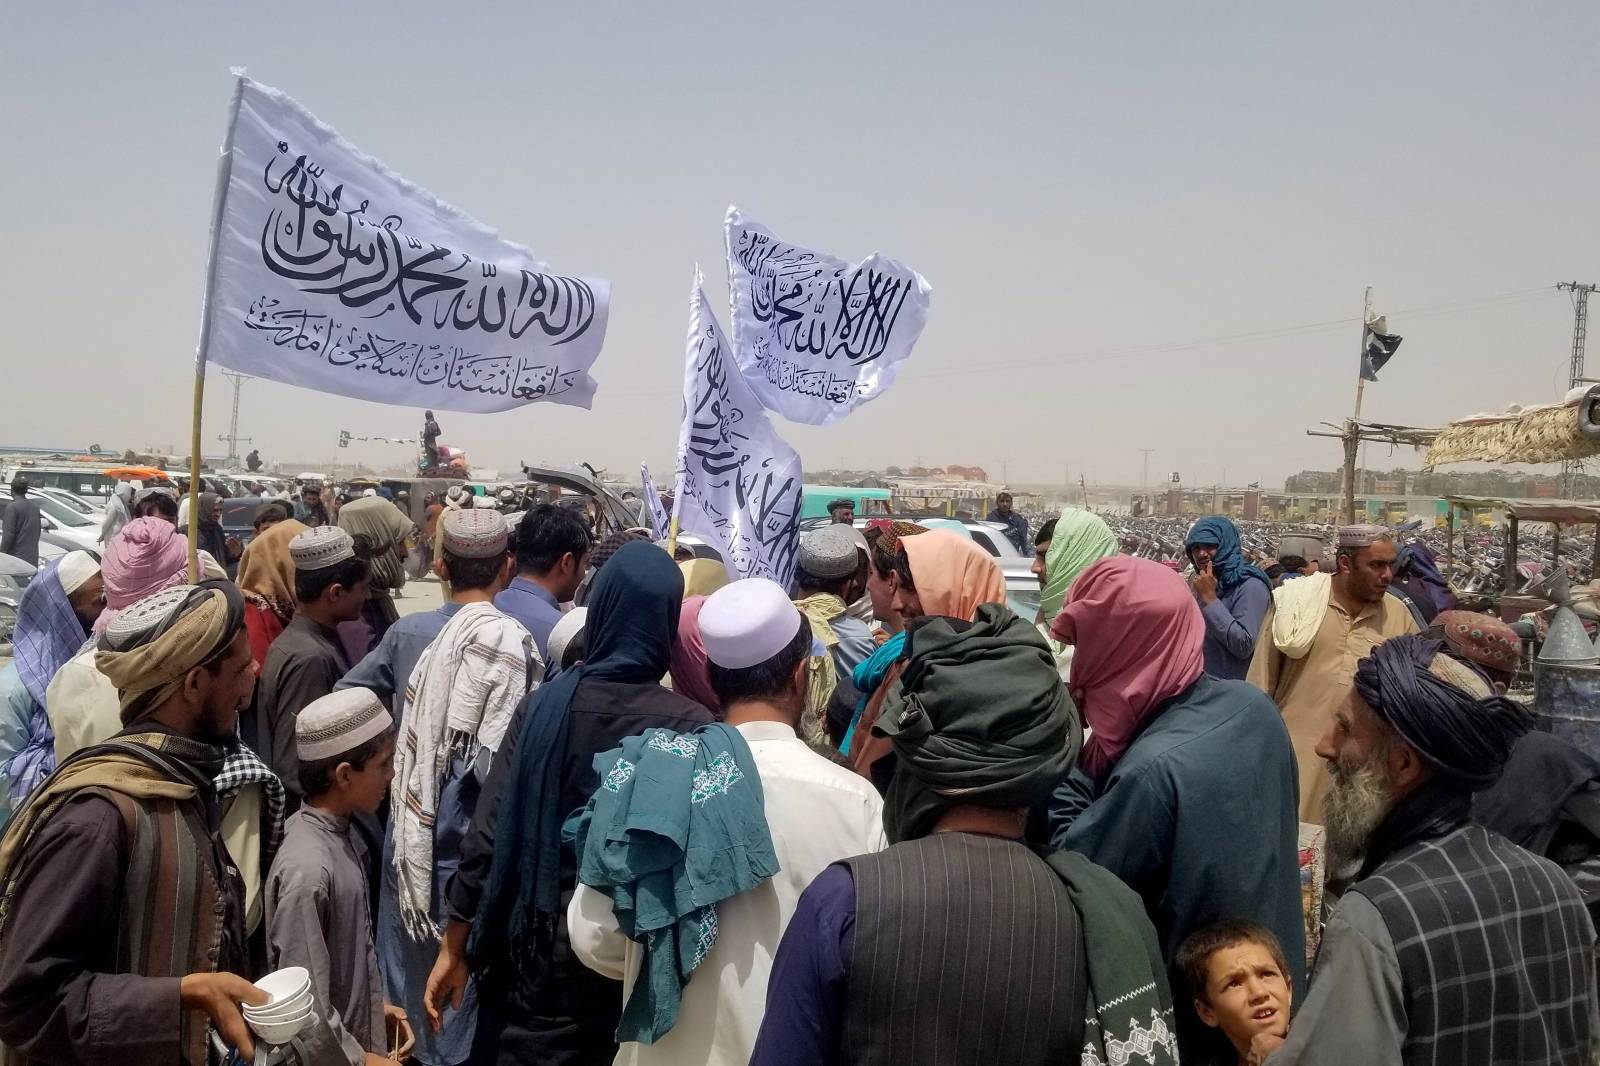 People with Taliban's flags gather to welcome a man, who was released from Prison in Afghanistan, at the Friendship Gate crossing point at the Pakistan-Afghanistan border town of Chaman